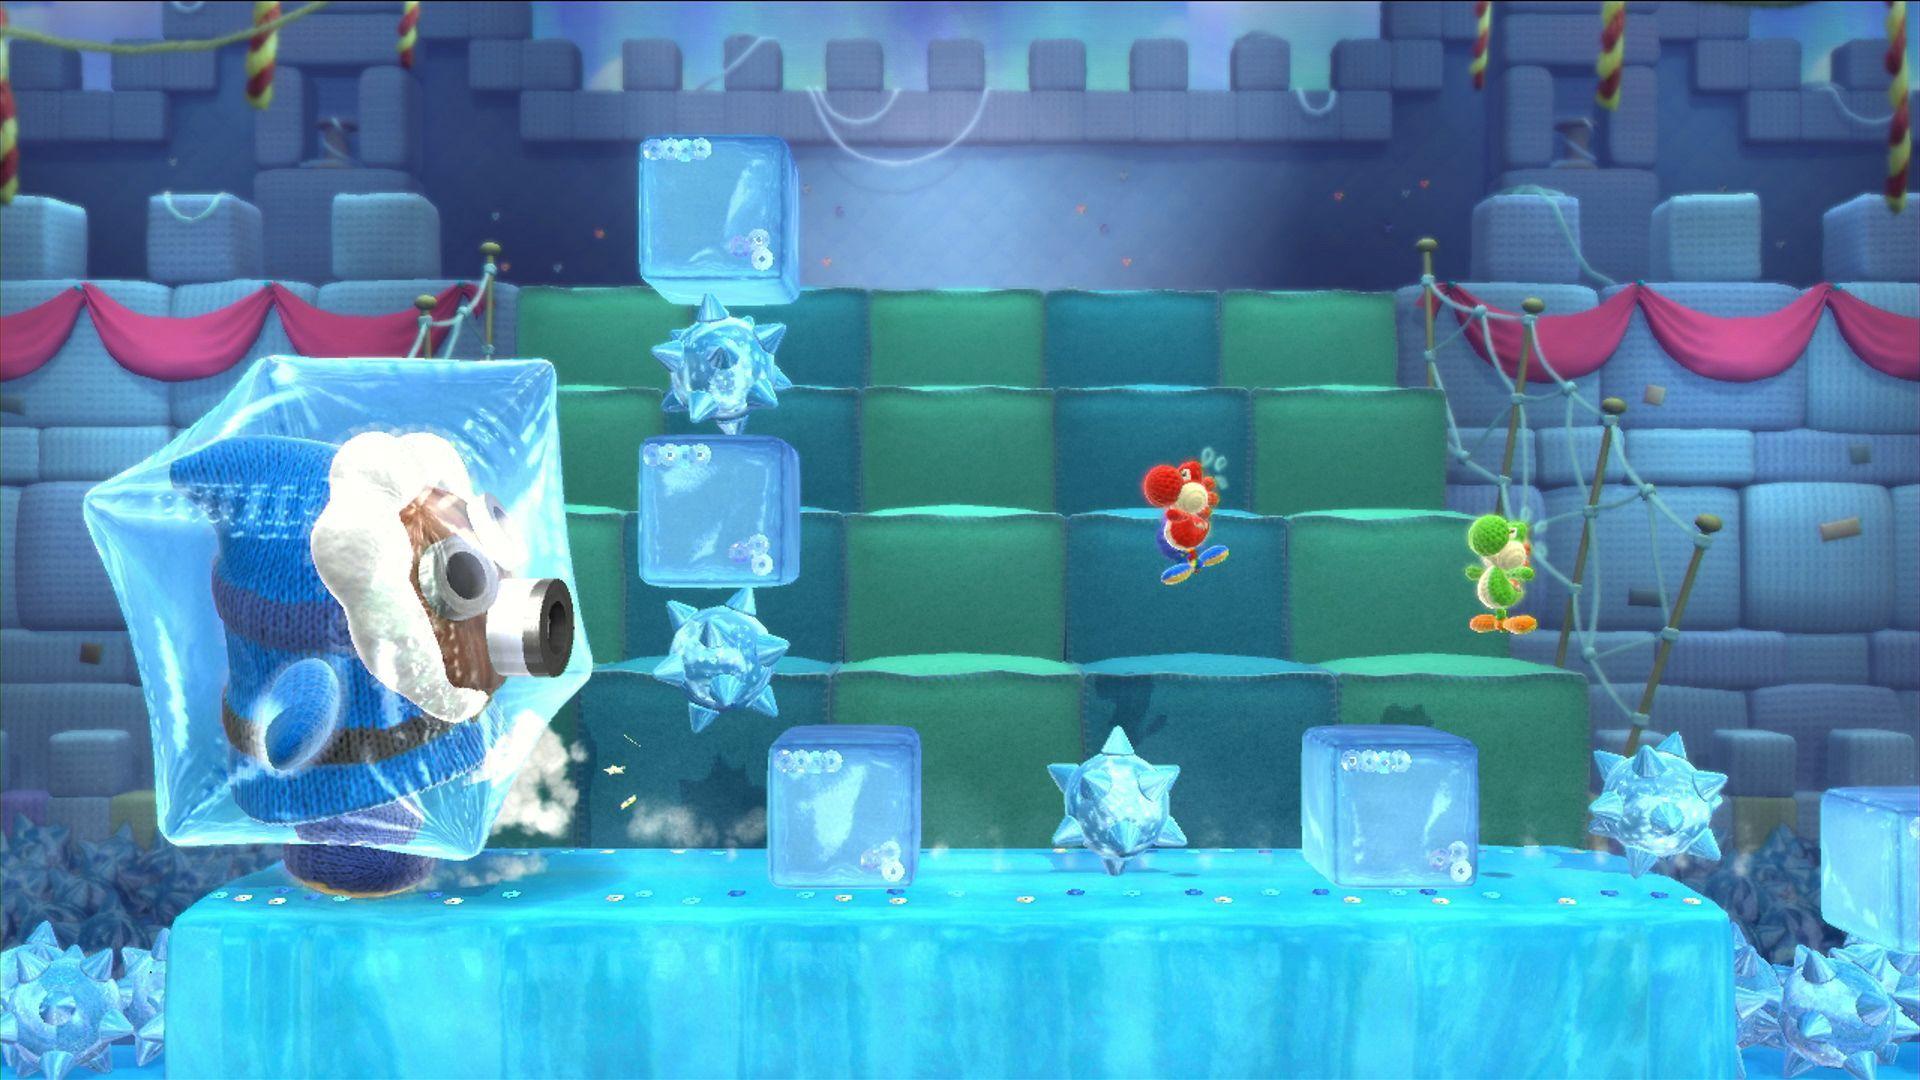 Yoshi's Woolly World REVIEW whimsy meets boredom